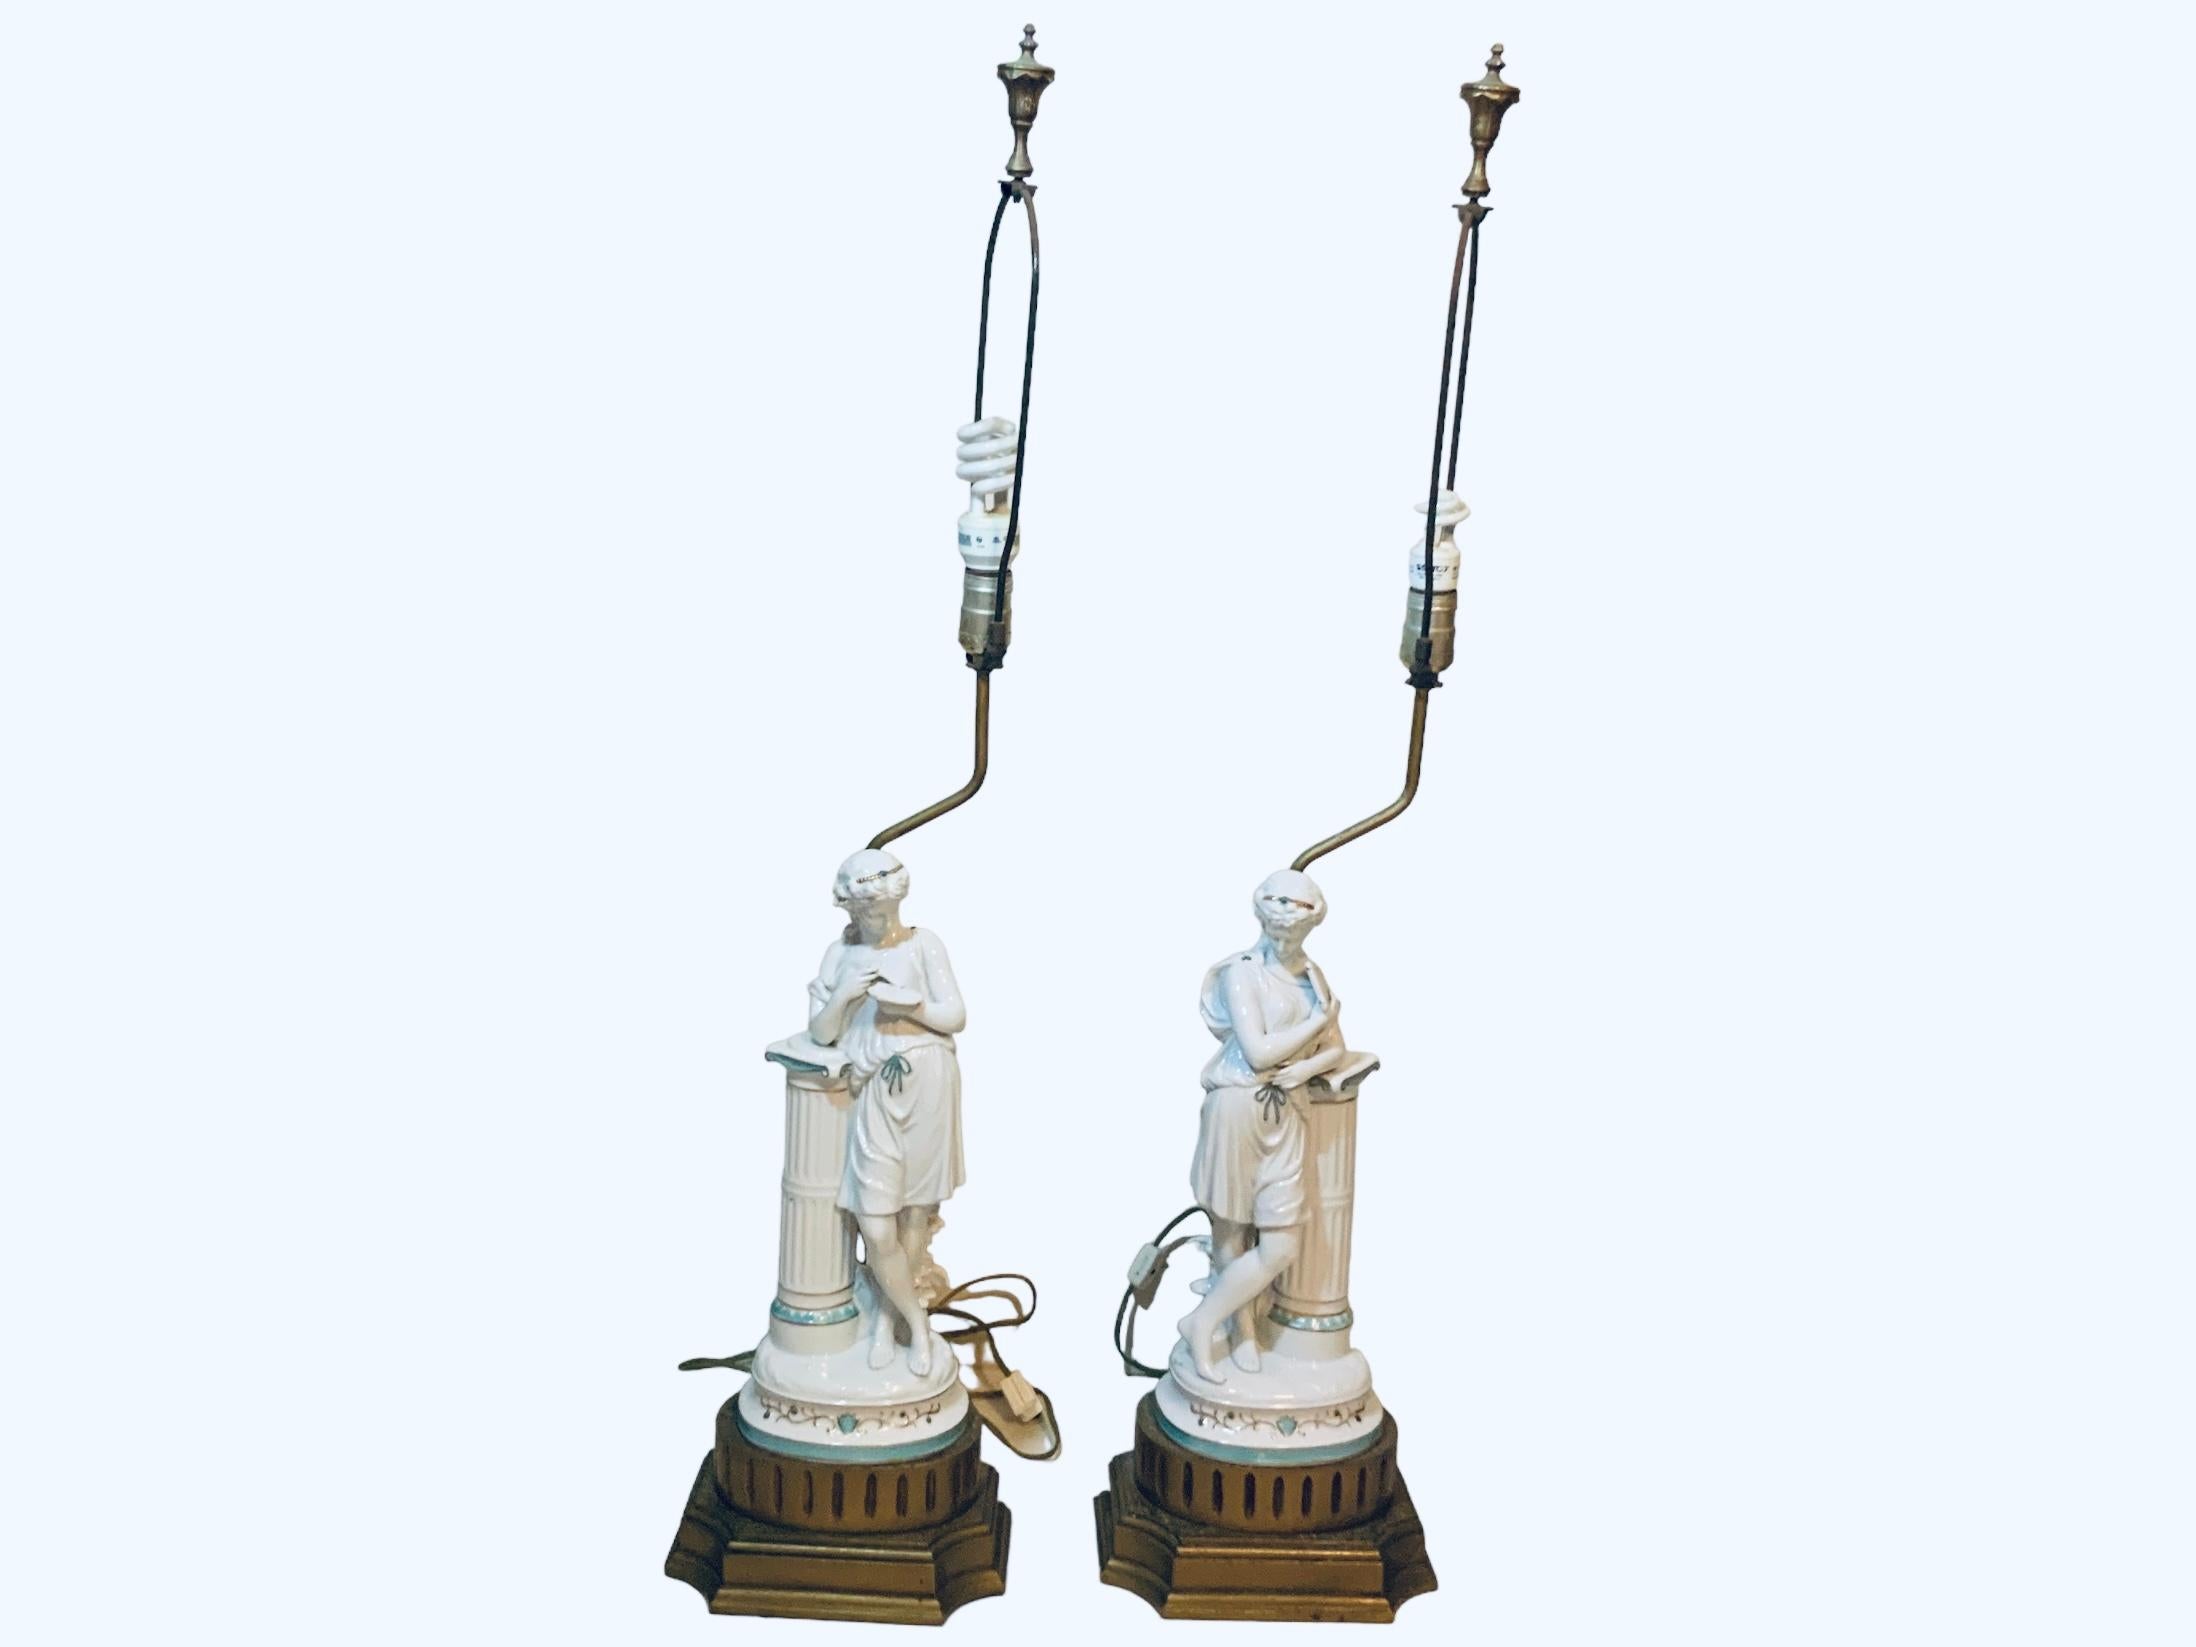 This is a Minton Porcelain sculptures lamps. They are hand painted glazed white porcelain with some light turquoise ornaments. It depicts two barefoot Greek/ Roman young ladies figures that are standing in front of large columns pedestals. One who